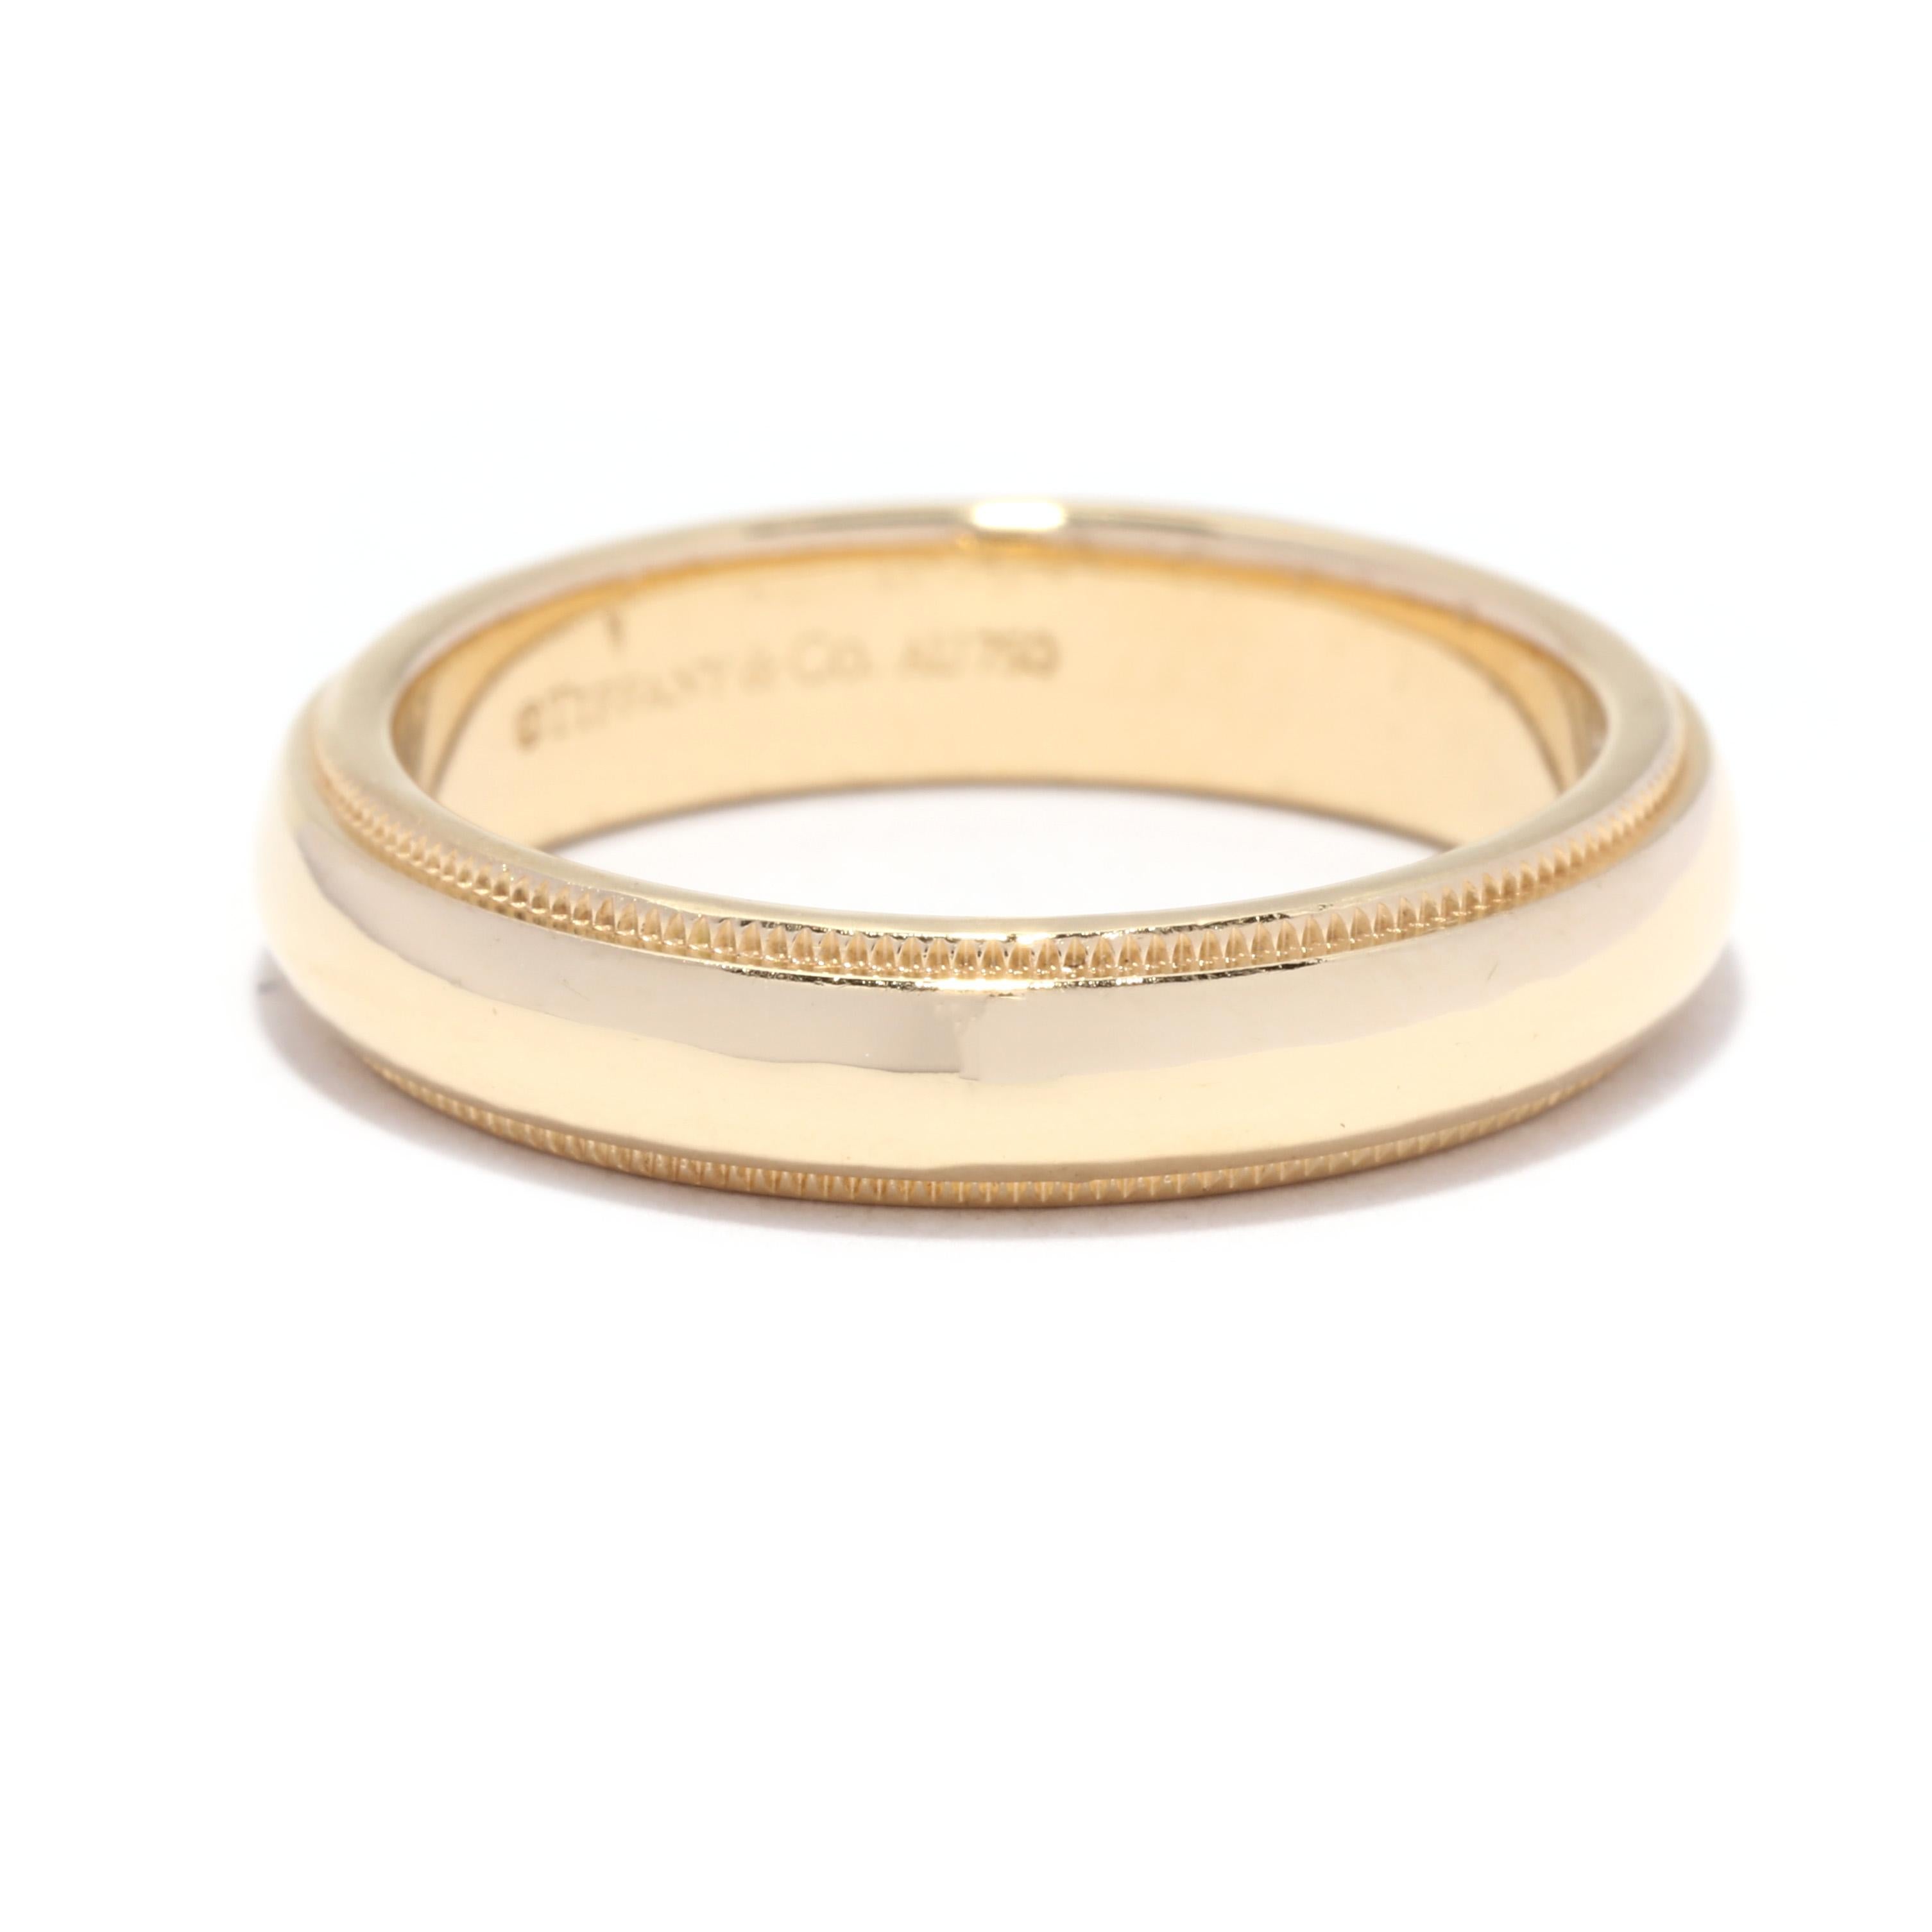 A vintage Tiffany & Co 18 karat yellow gold milgrain wedding band. This stackable band features a slightly domed design with a polished center and with milgrain detailing in an eternity design.

Ring Sise 6.25

Width: 4.25 mm

Weight: 4.2 dwts. /